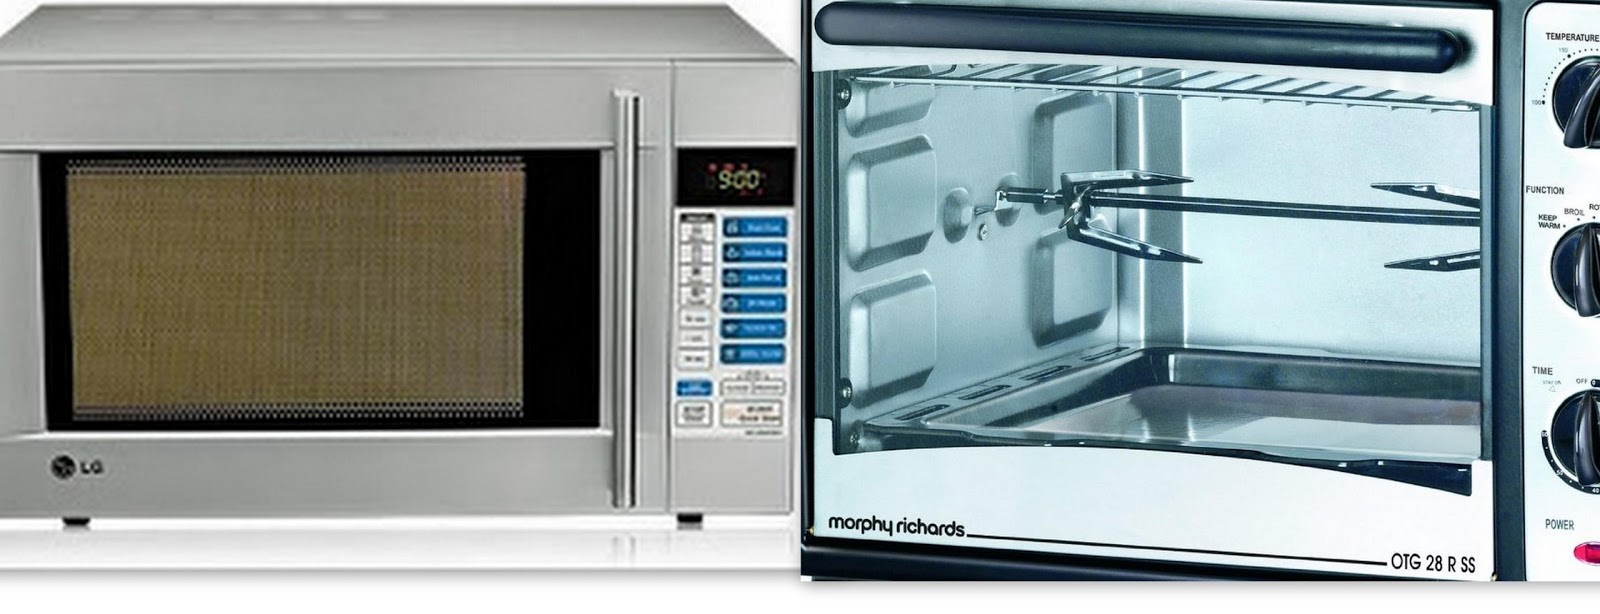 How are convection ovens different from conventional ovens?